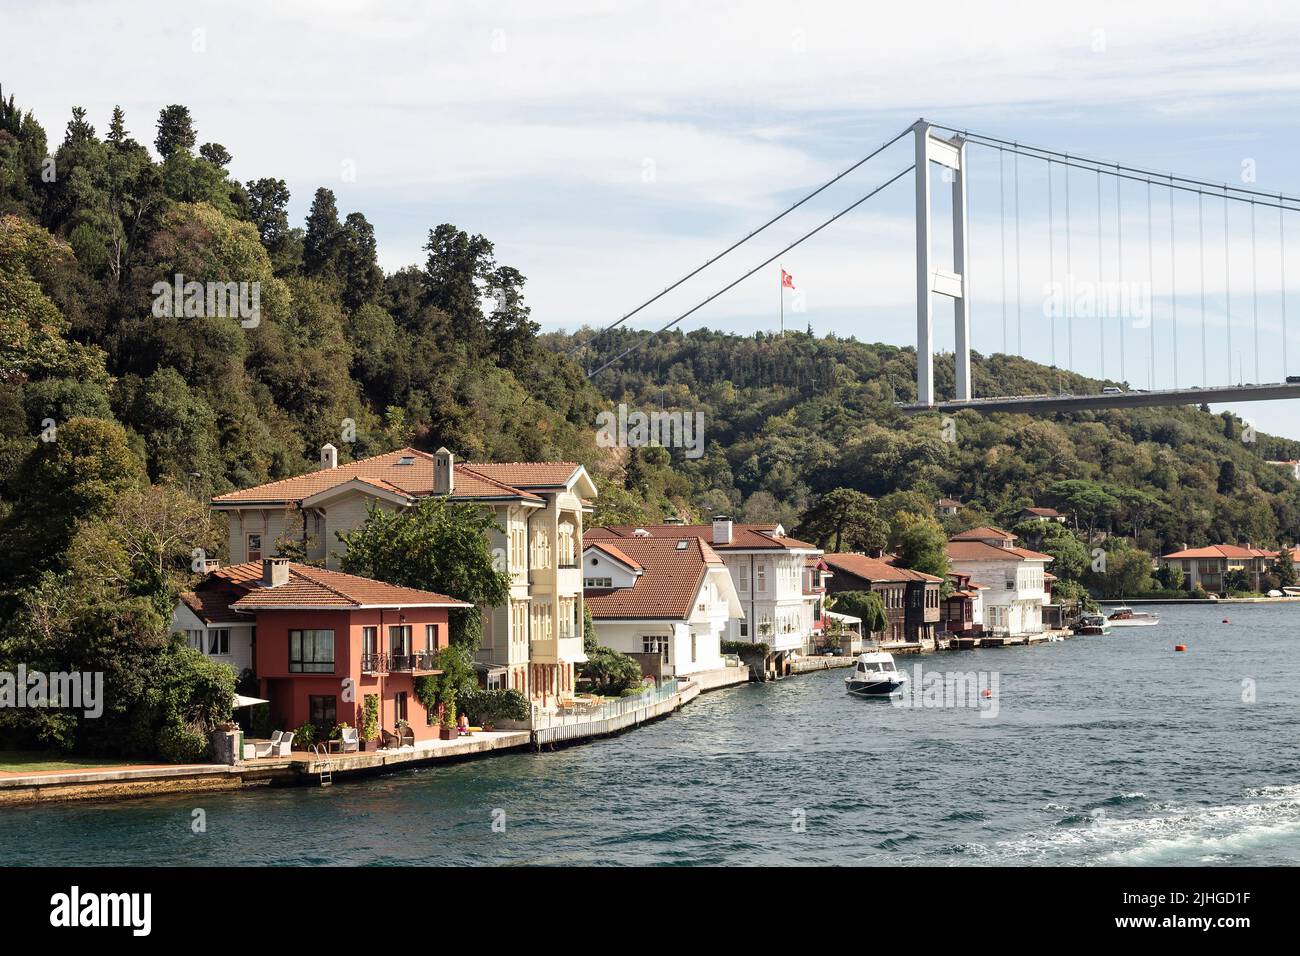 View of historical, traditional mansions by Bosphorus in Kanlica area of Asian side of Istanbul. Boats and FSM bridge are also in the view. It is a su Stock Photo